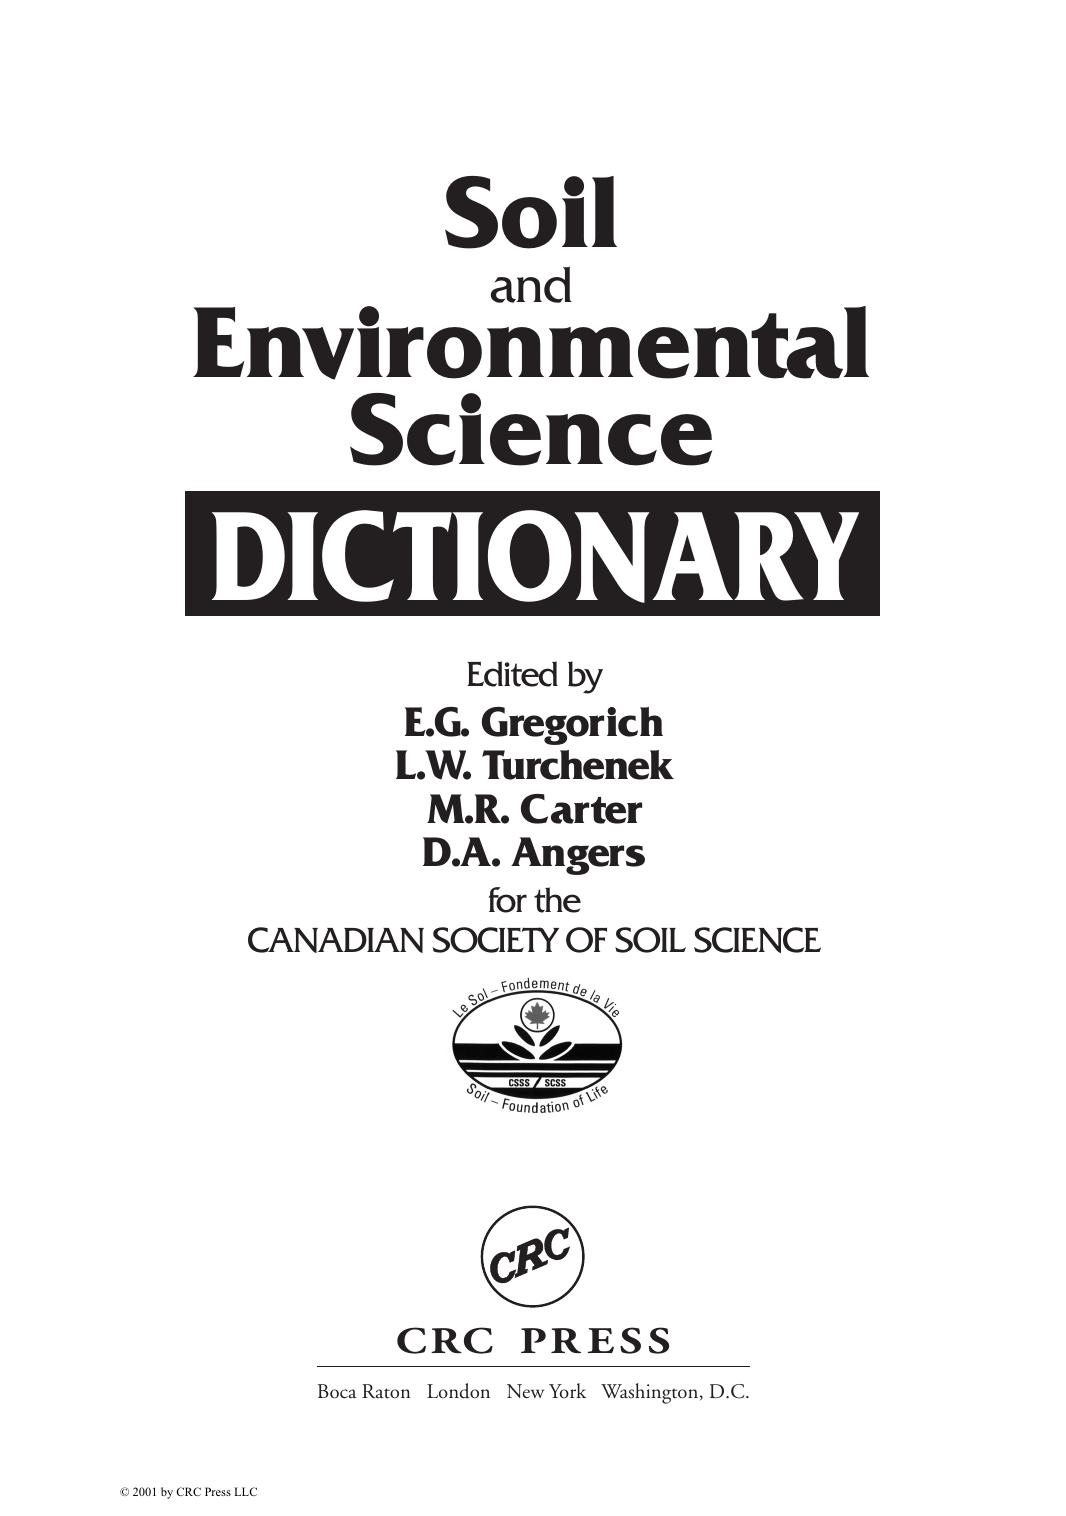 Soil and environmental science dictionary ( PDFDrive ) (1), 2001